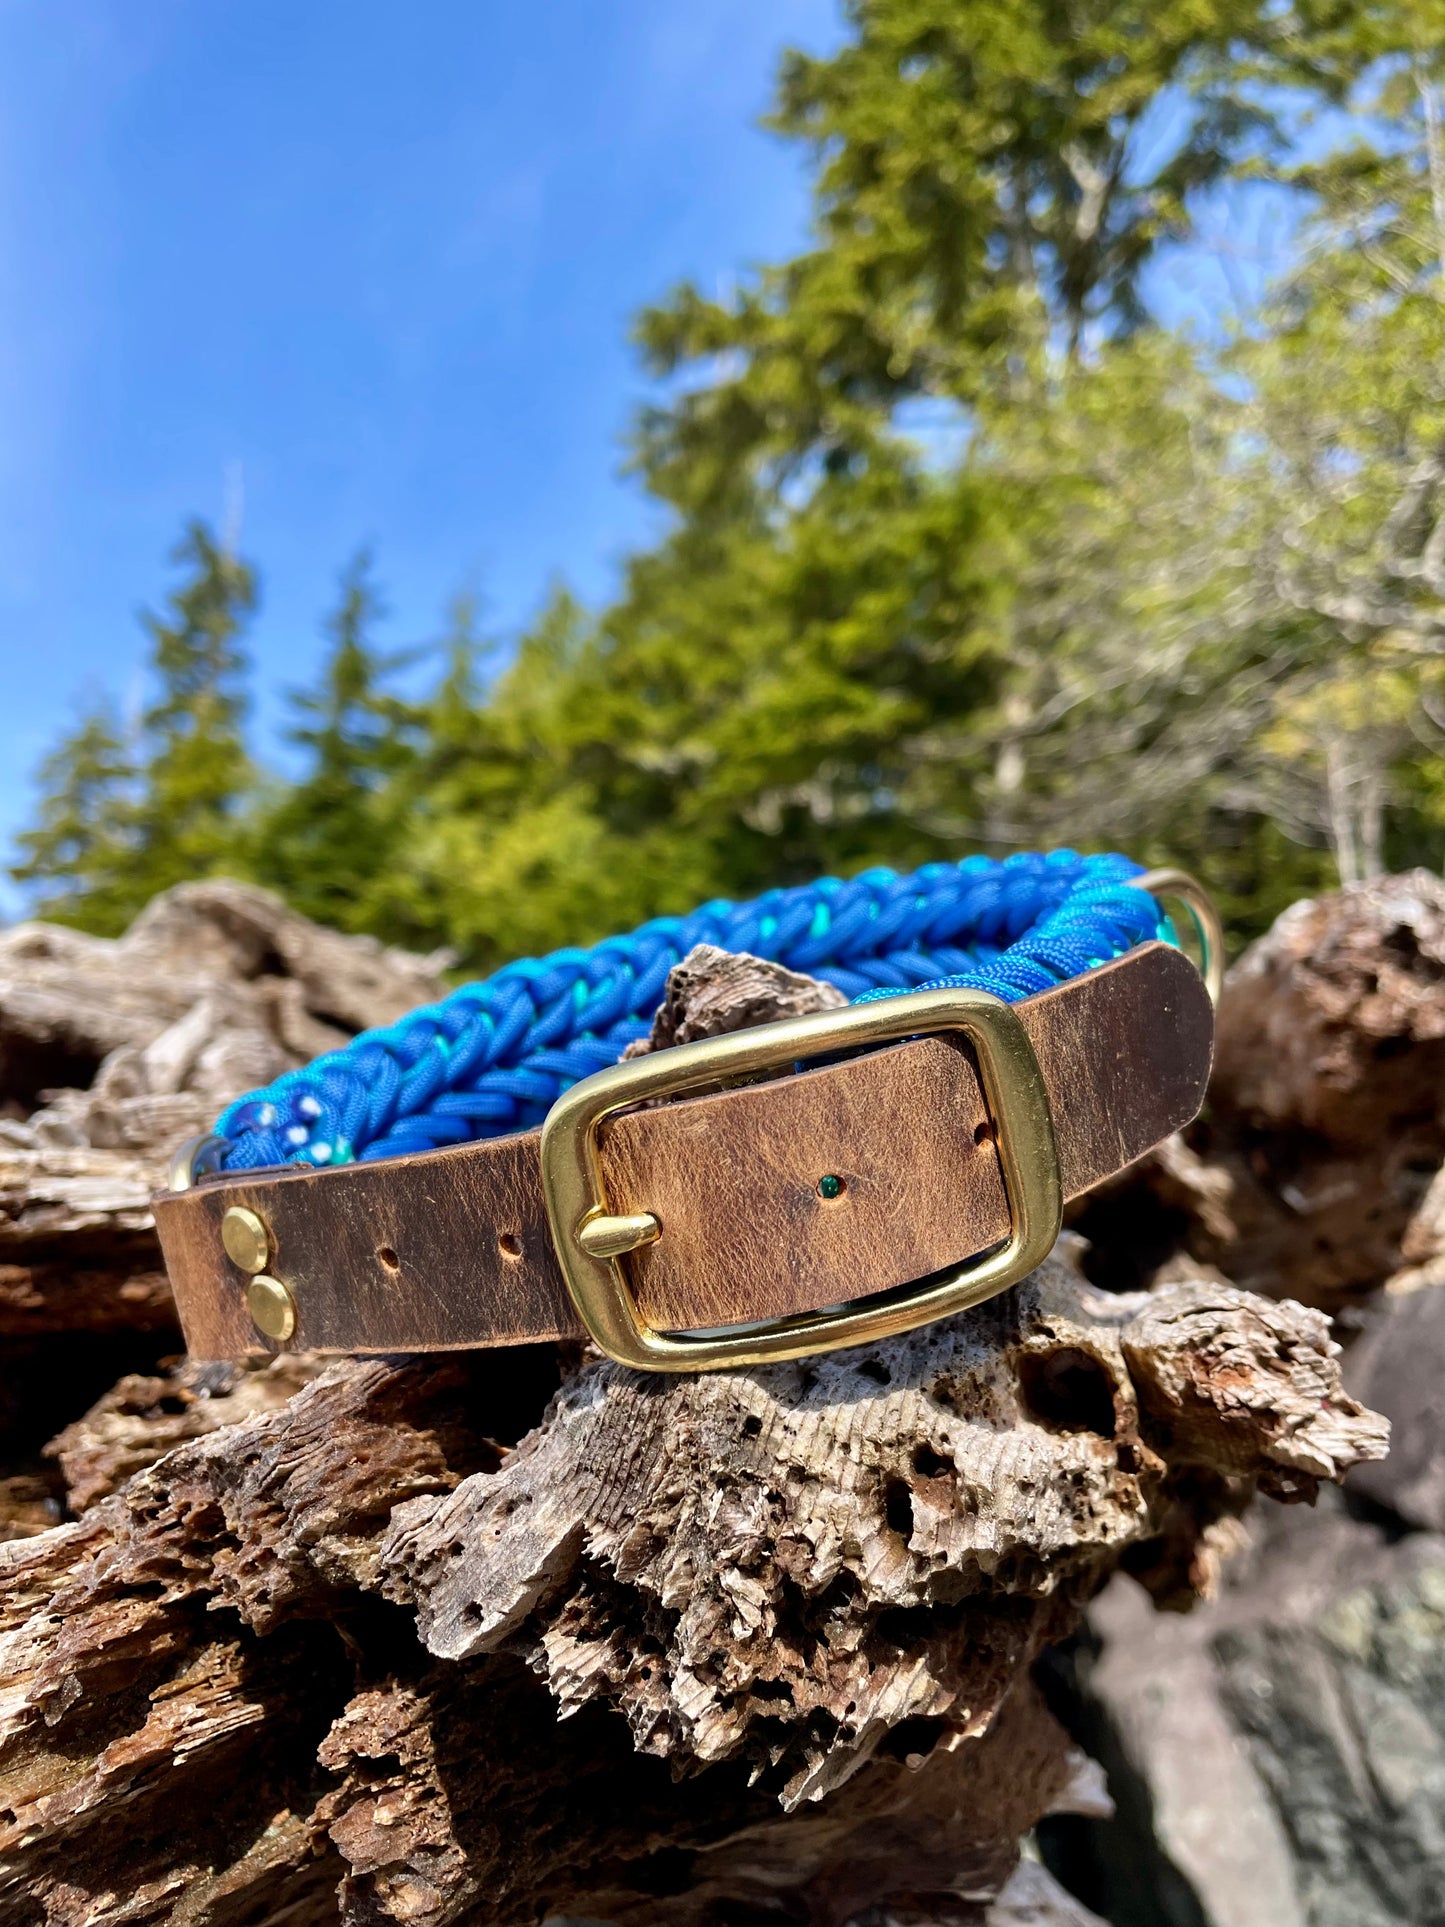 Premium Teal and Blue Paracord Dog Collar with Gold hardware and leather or Biothane belt On Driftwood In Tofino